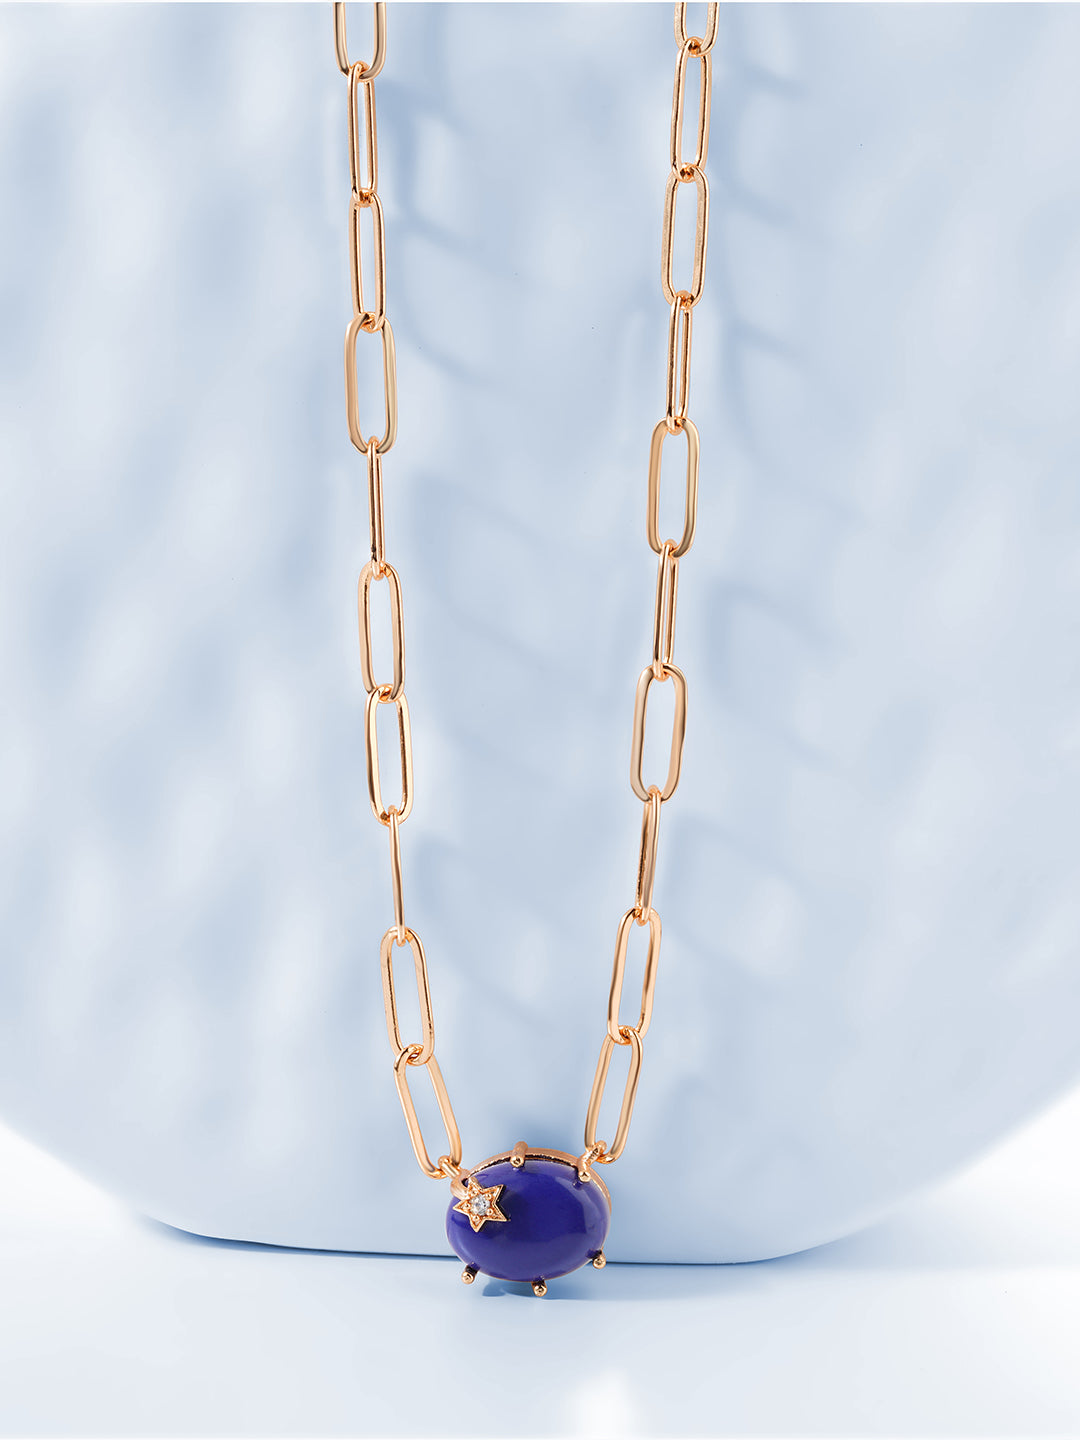 Womens White Gold Plated Blue Stone Link Chain Pendant Necklace